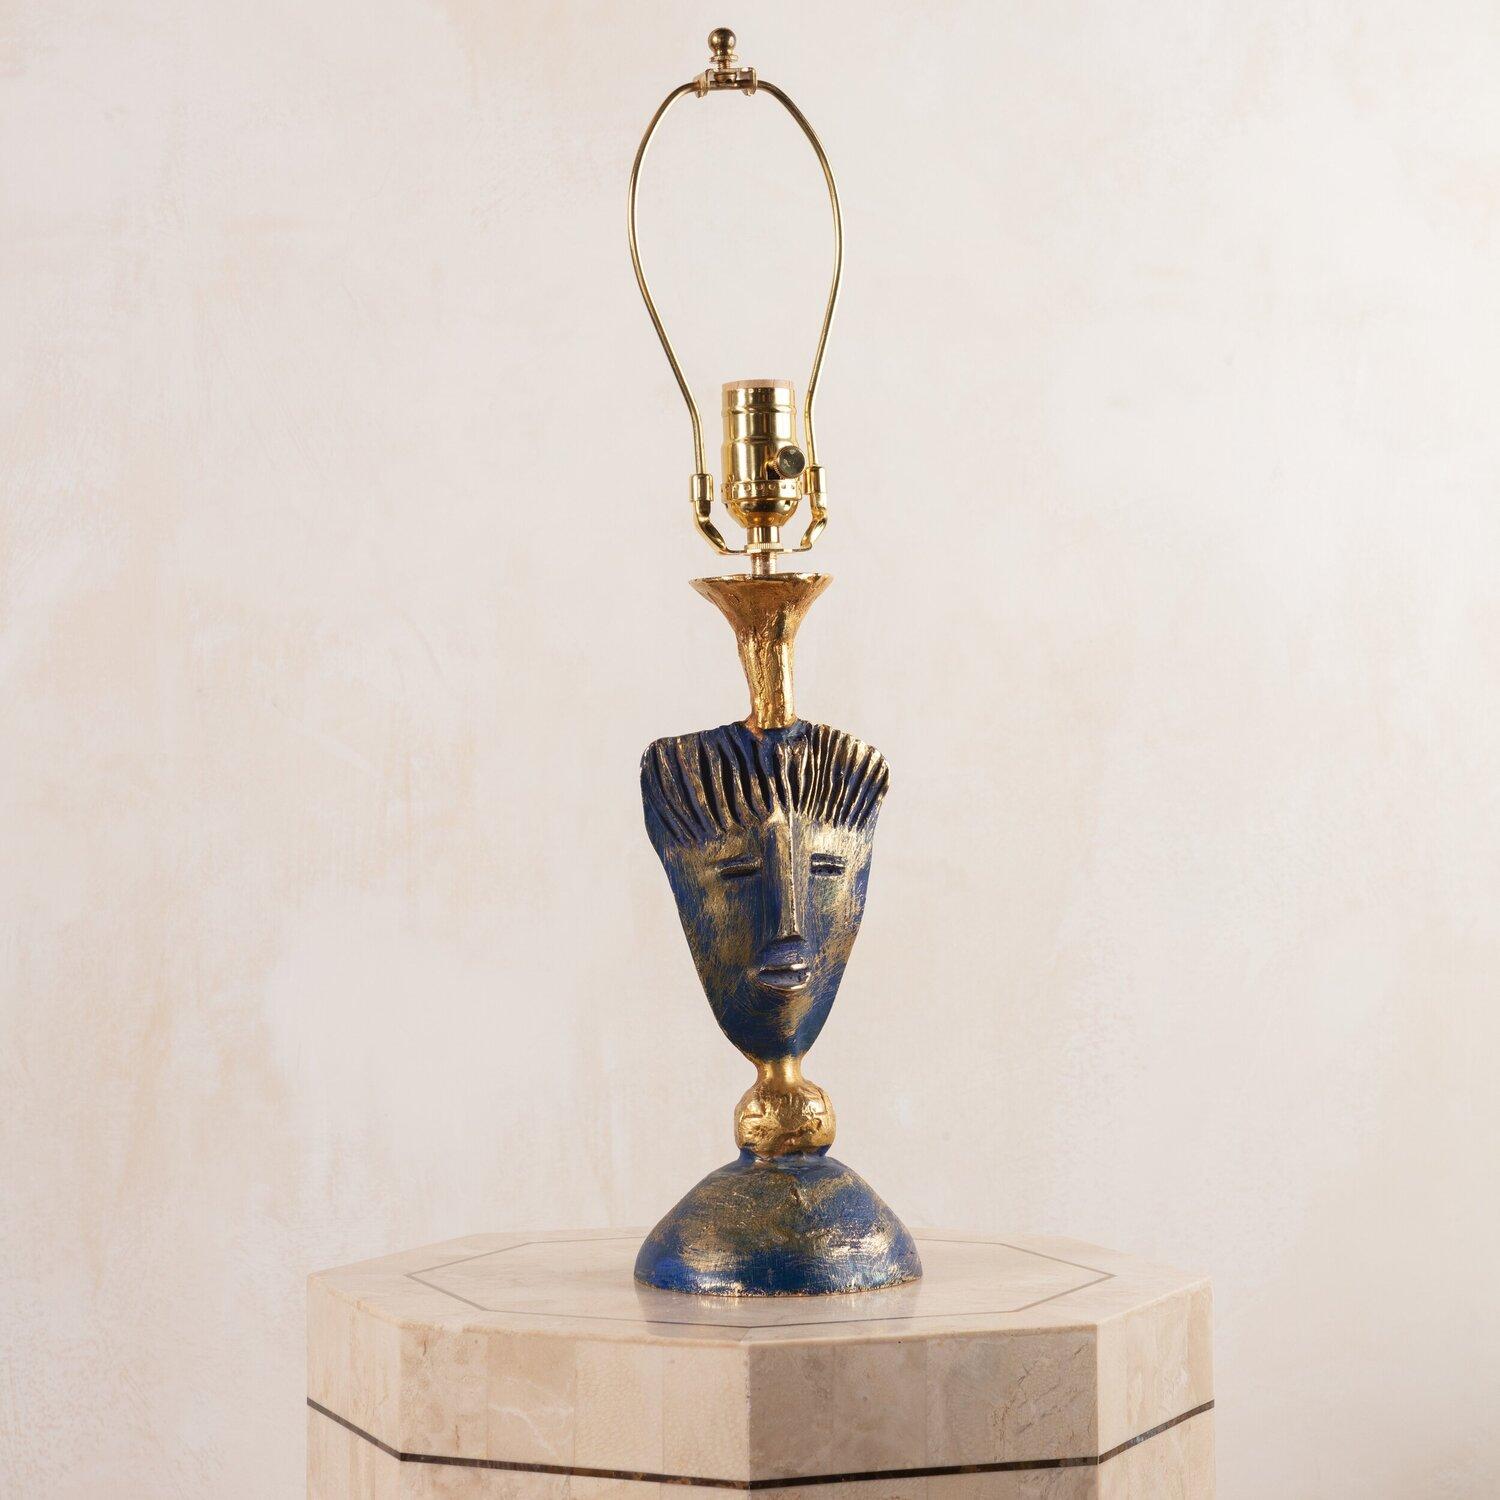 A gorgeous accent lamp designed by Pierre Casenove (1943-) in France for Fondica. This lamp features one of Casenove’s most iconic designs and is crafted of gilt bronze with azure accents.